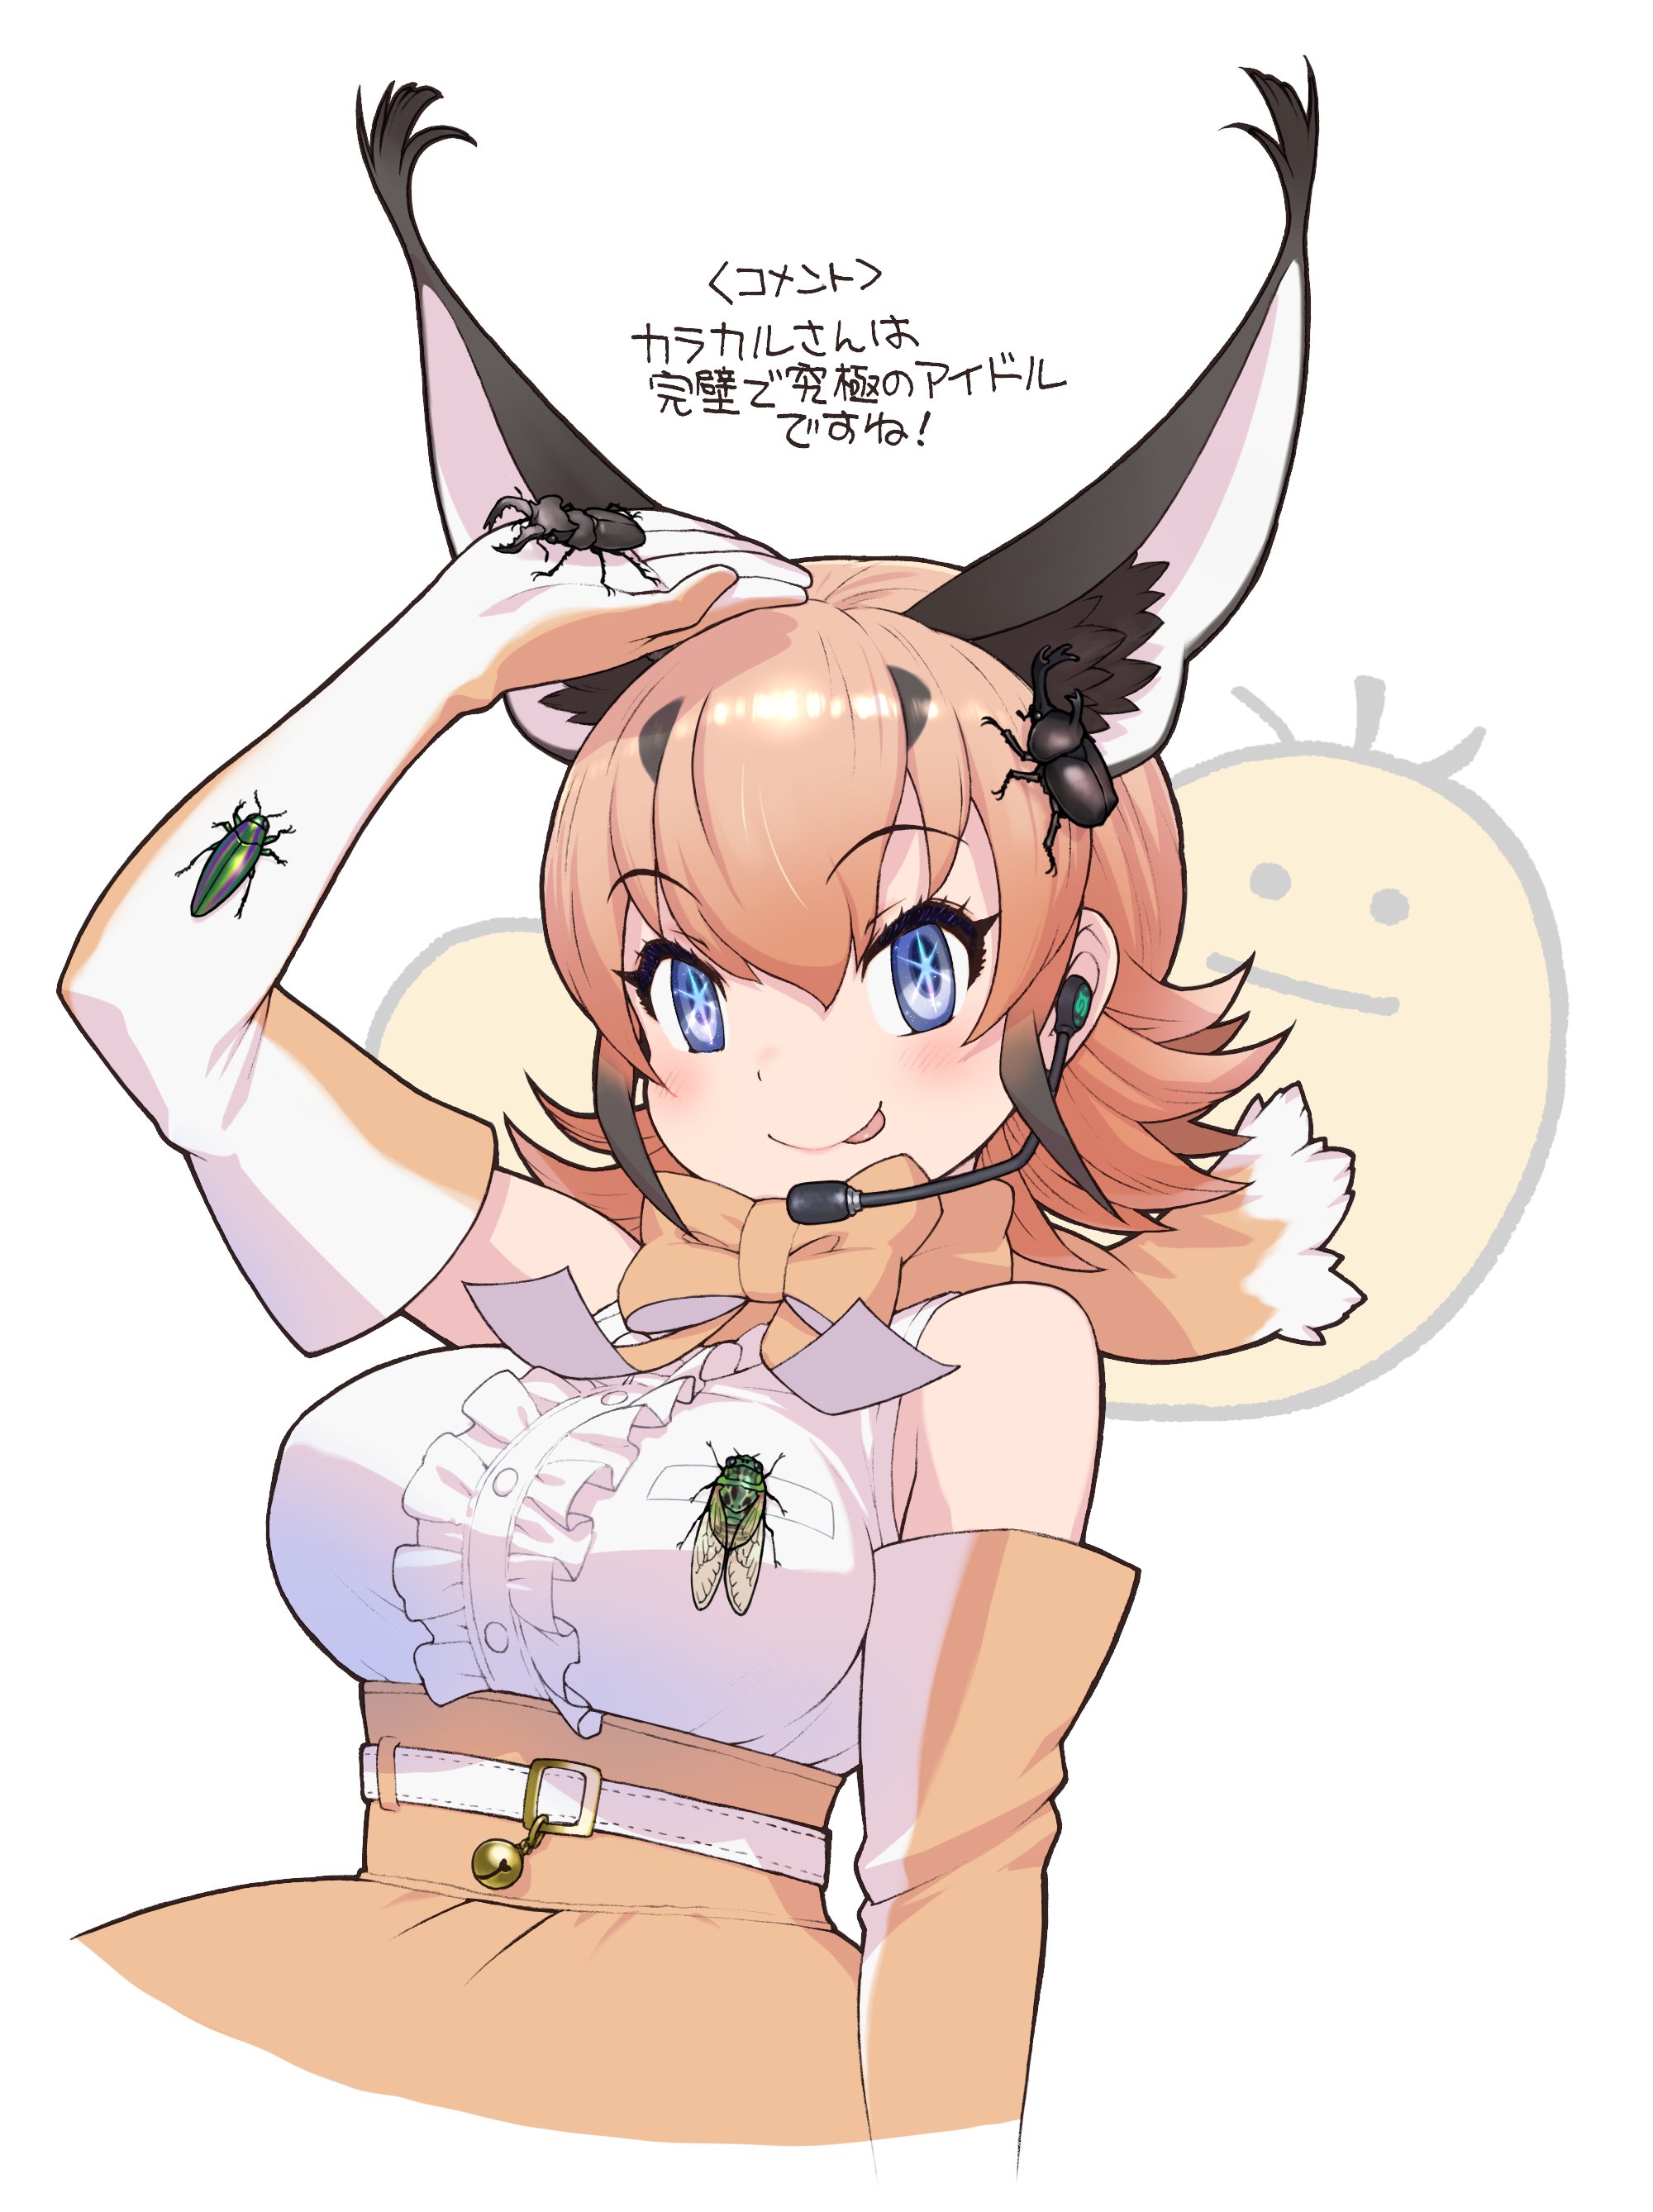 Official art in celebration of KemoV's Caracal reaching 10,000 subscribers on her channel.